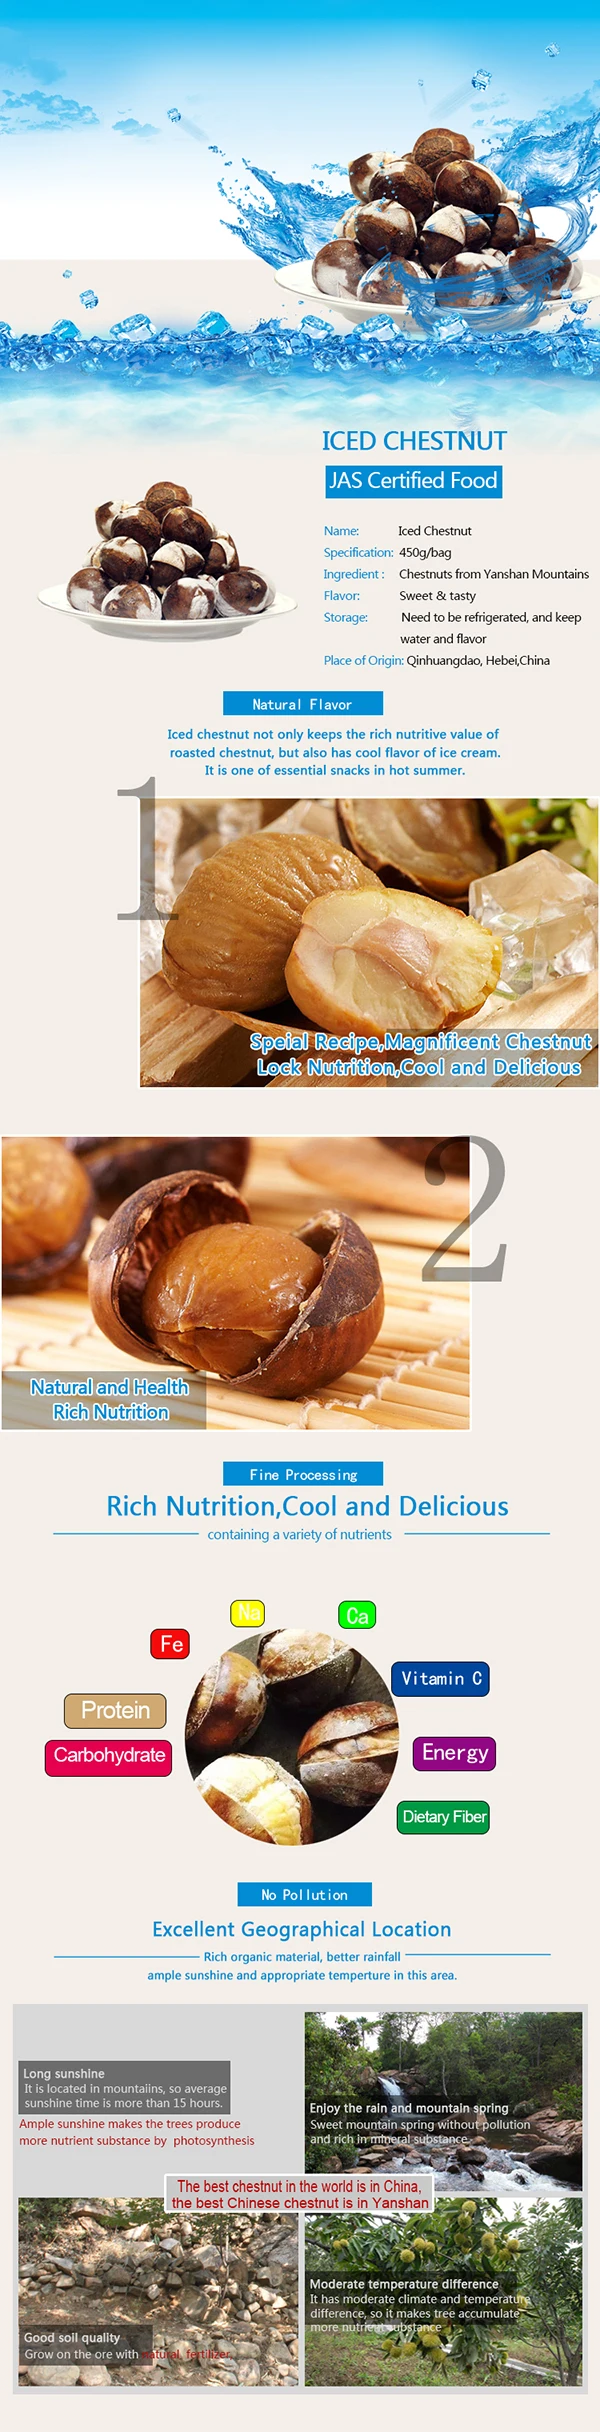 Details of Iced Chestnuts.jpg